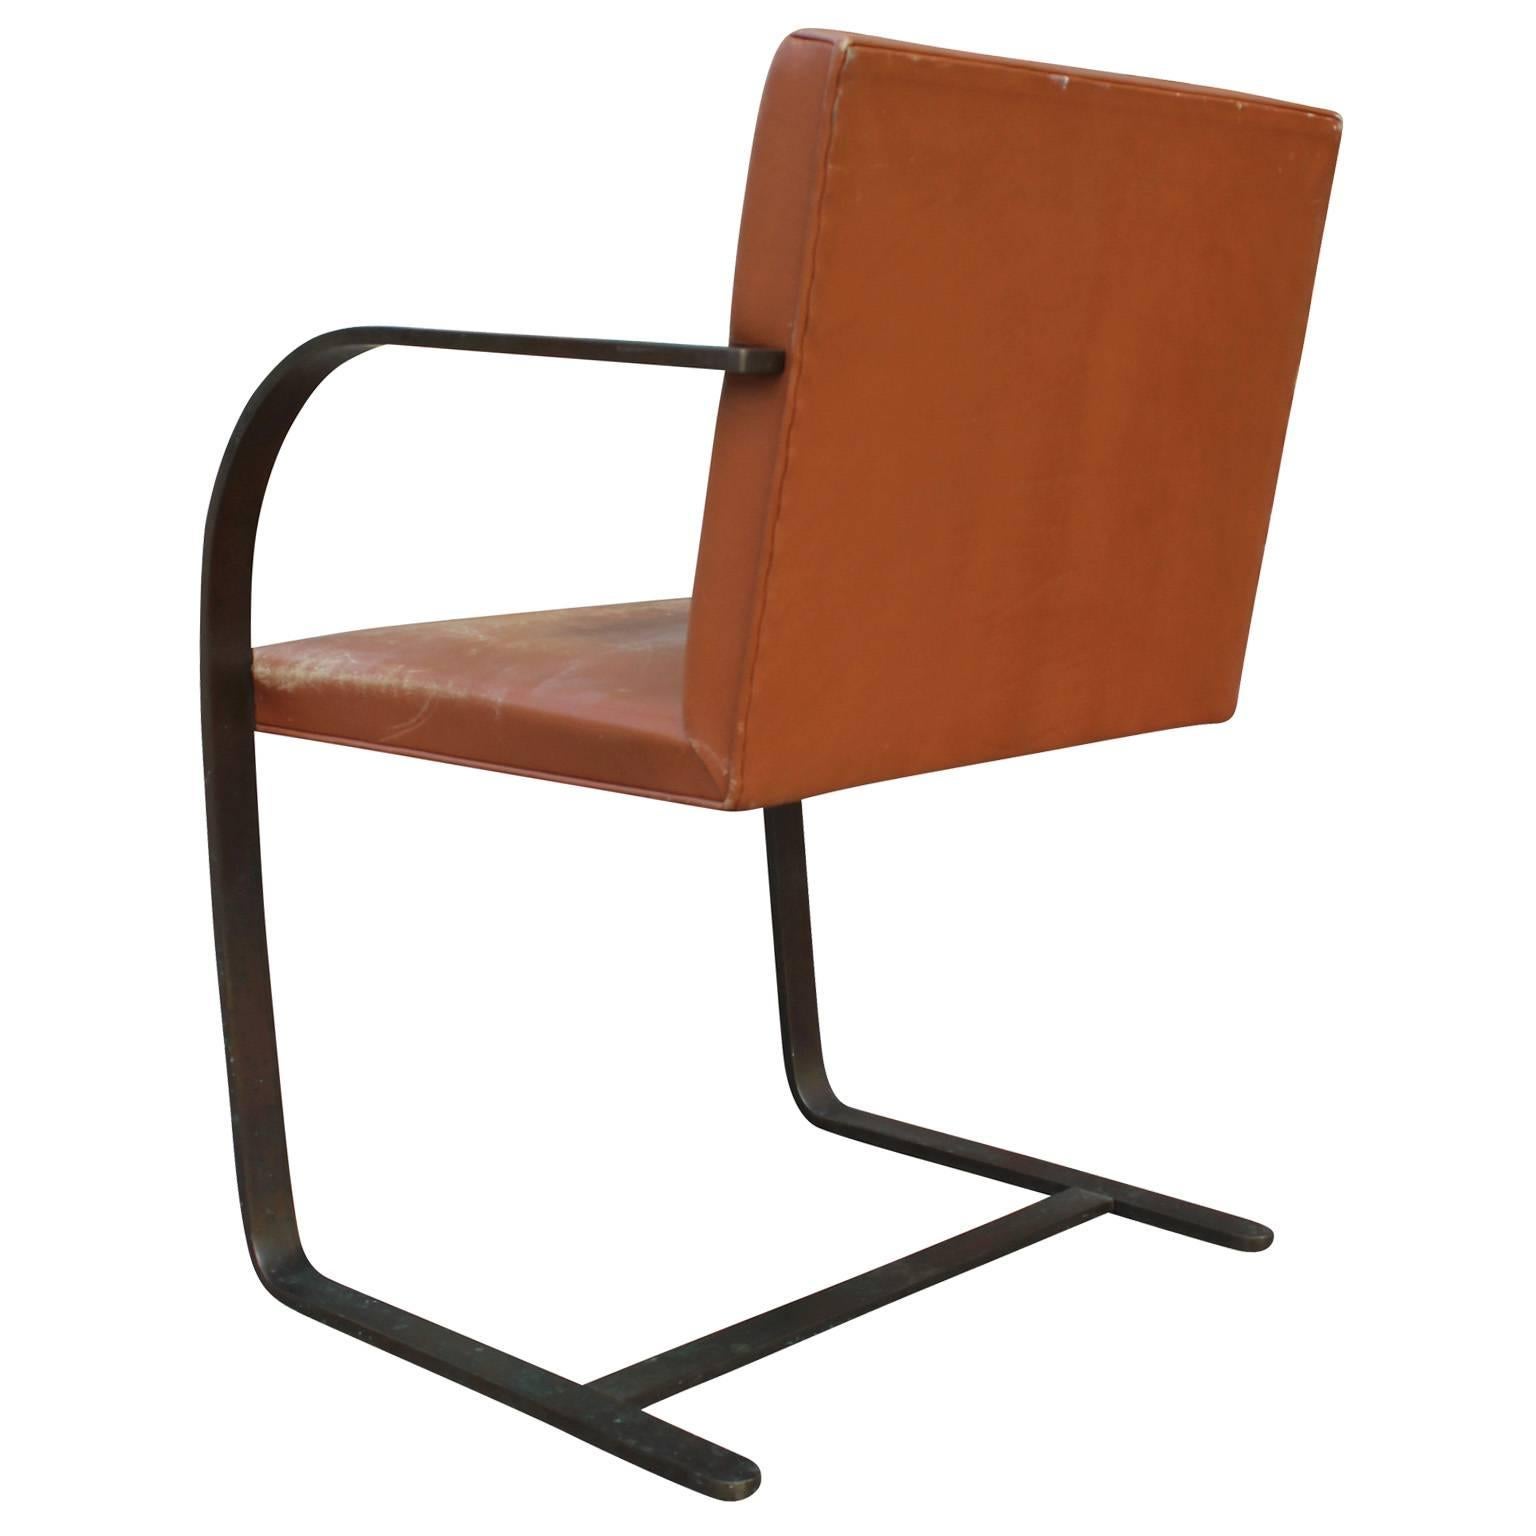 Modern Rare Mies van der Rohe for Knoll Brno Chair in Bronze and Caramel Leather